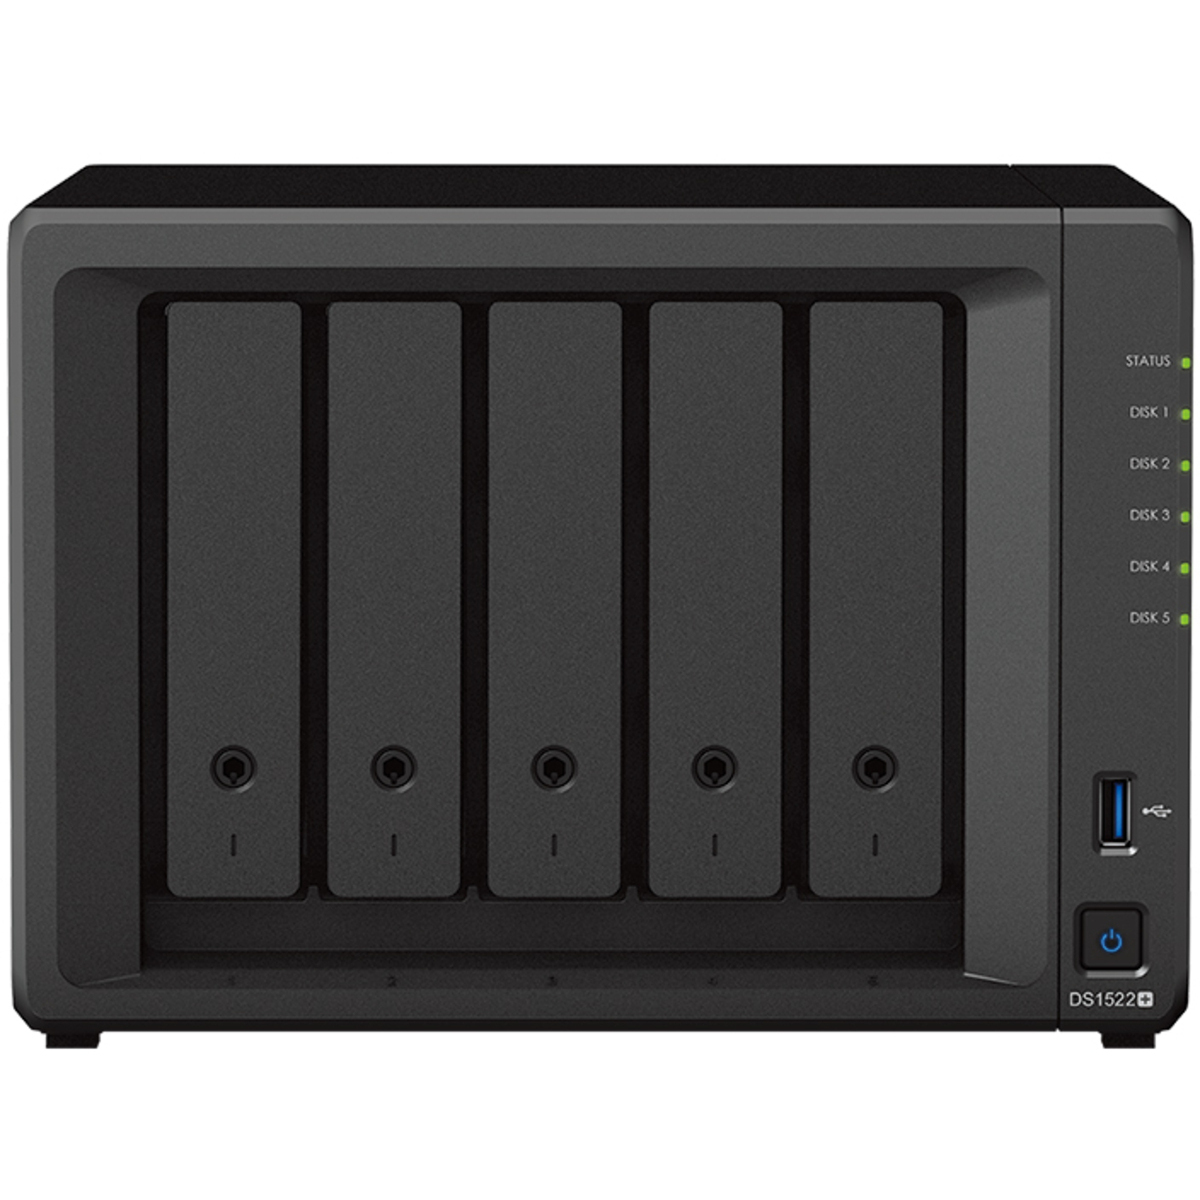 buy Synology DiskStation DS1522+ 100tb Desktop NAS - Network Attached Storage Device 5x20000gb Seagate EXOS X20 ST20000NM007D 3.5 7200rpm SATA 6Gb/s HDD ENTERPRISE Class Drives Installed - Burn-In Tested - nas headquarters buy network attached storage server device das new raid-5 free shipping simply usa DiskStation DS1522+